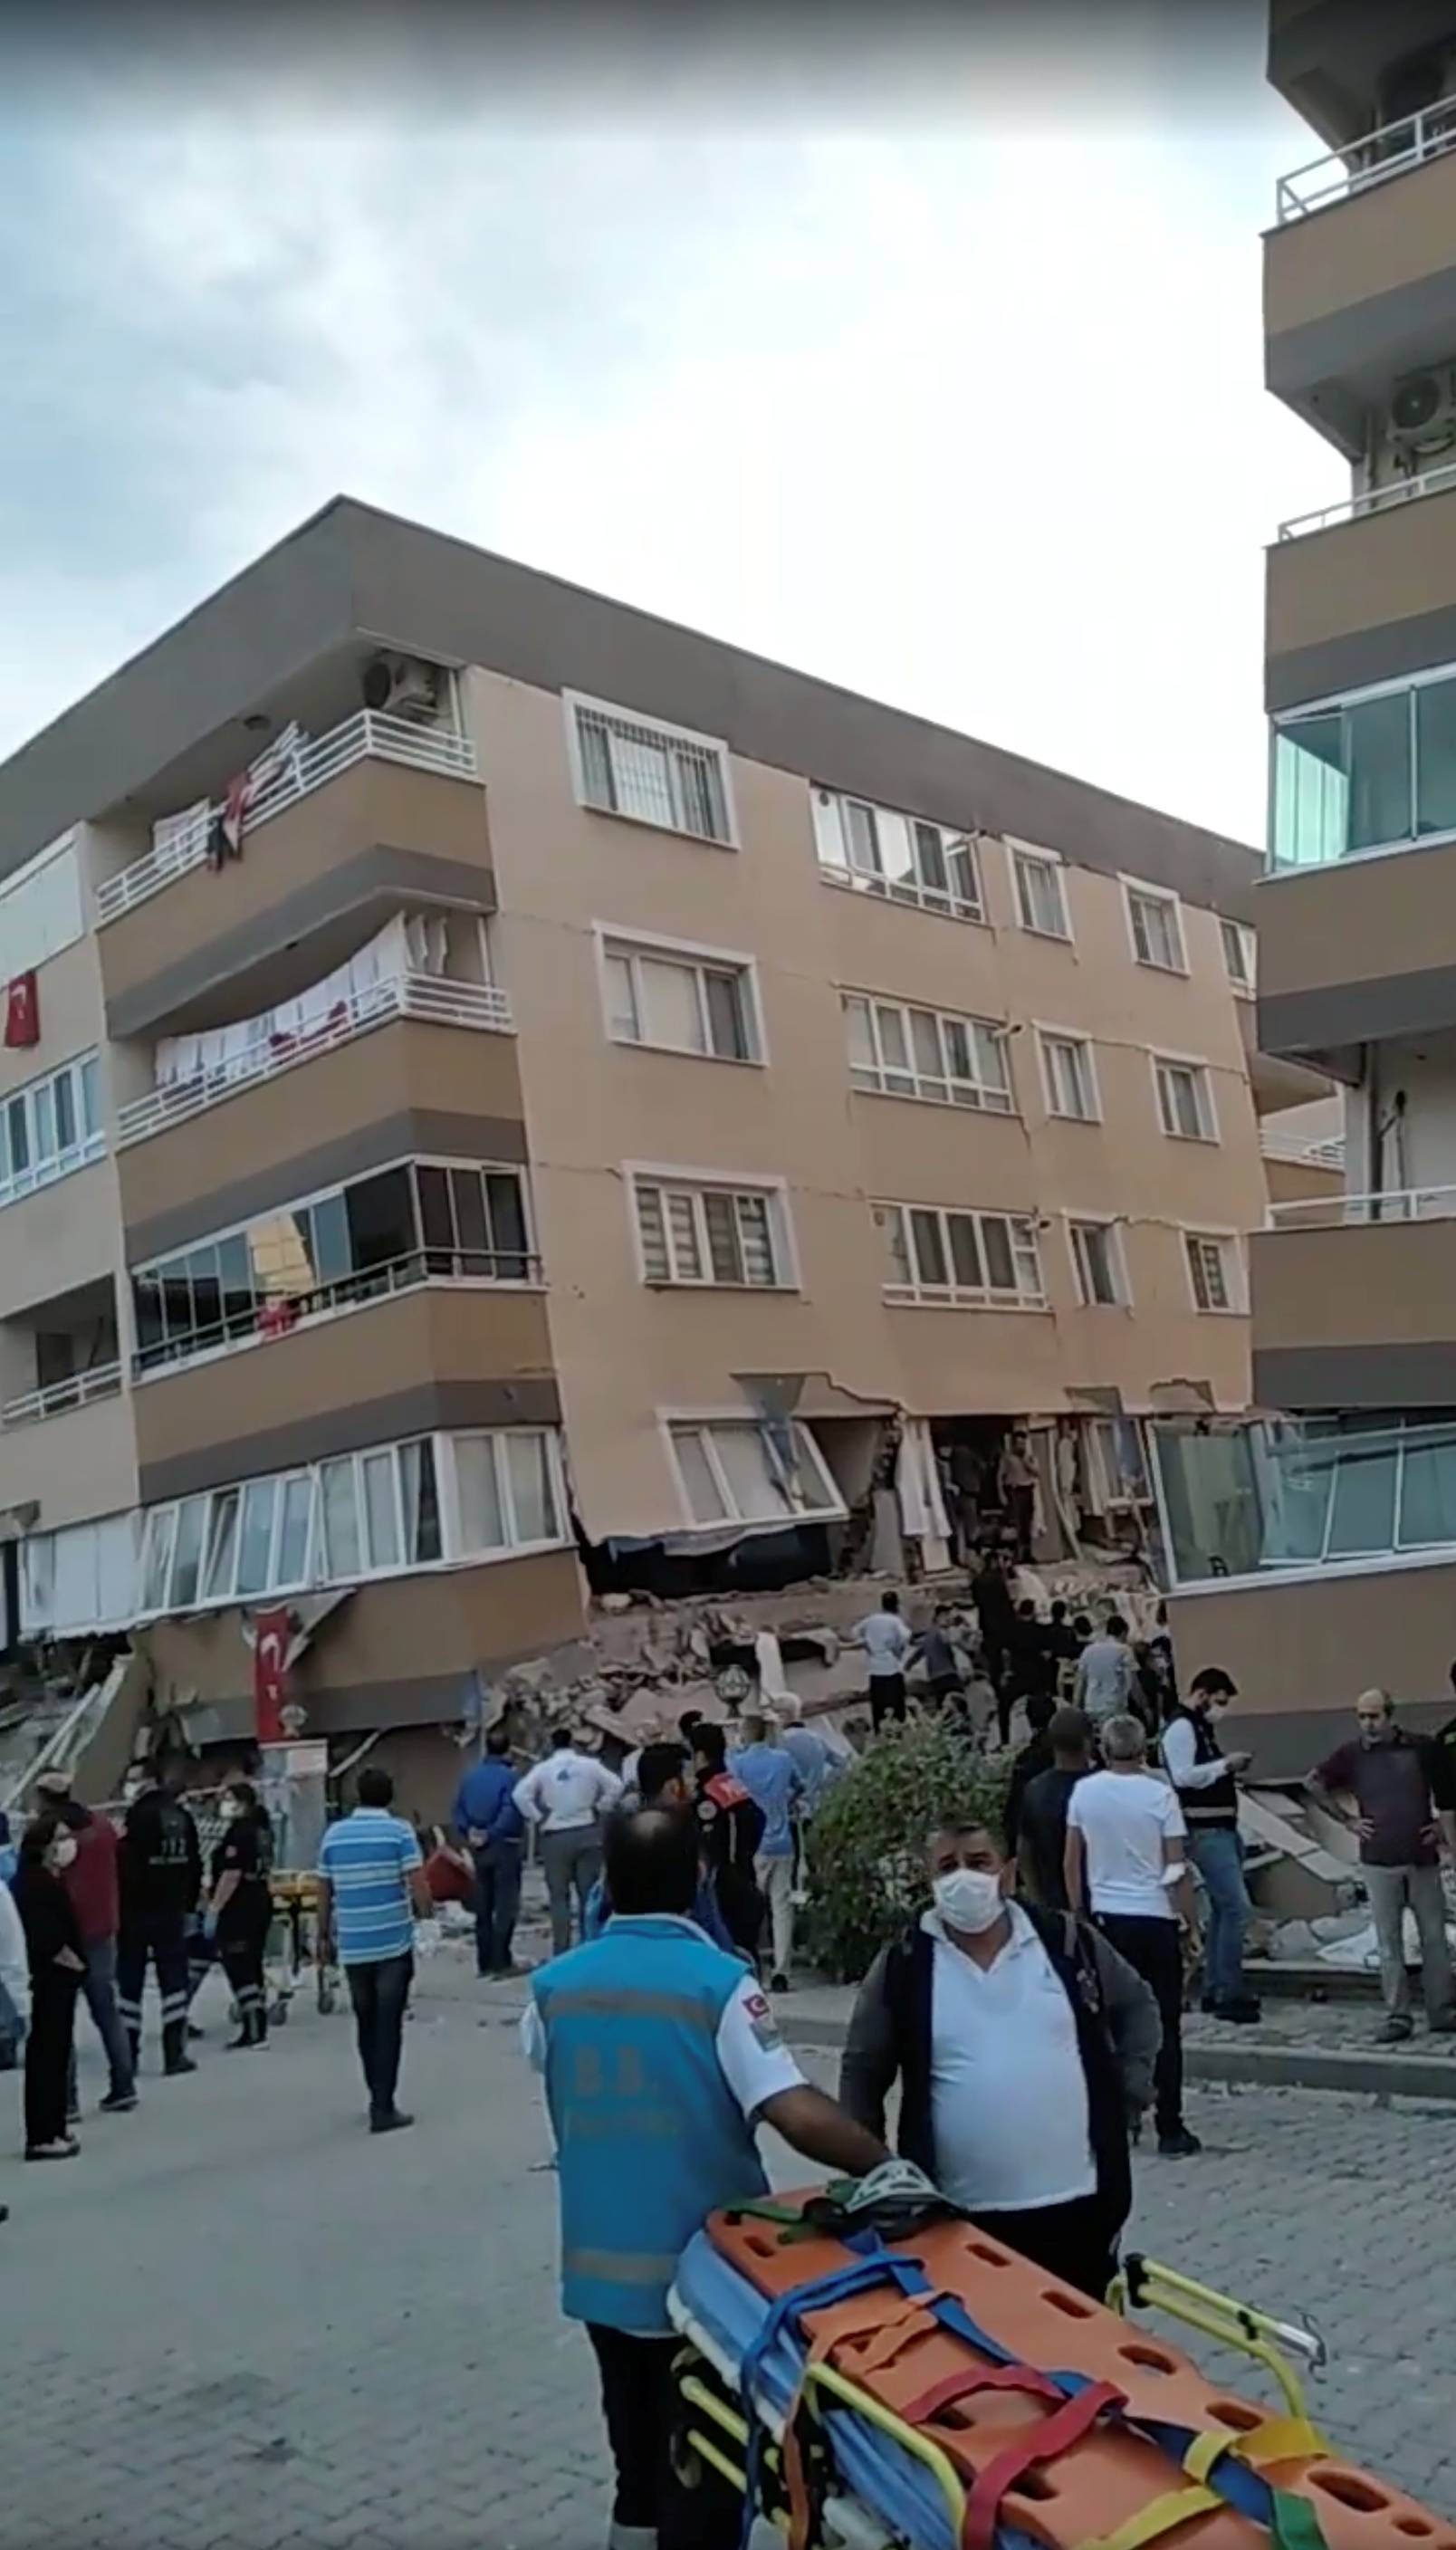 Rescue operations take place around subsided and collapsed buildings after a strong earthquake struck the Aegean Sea, in the coastal province of Izmir